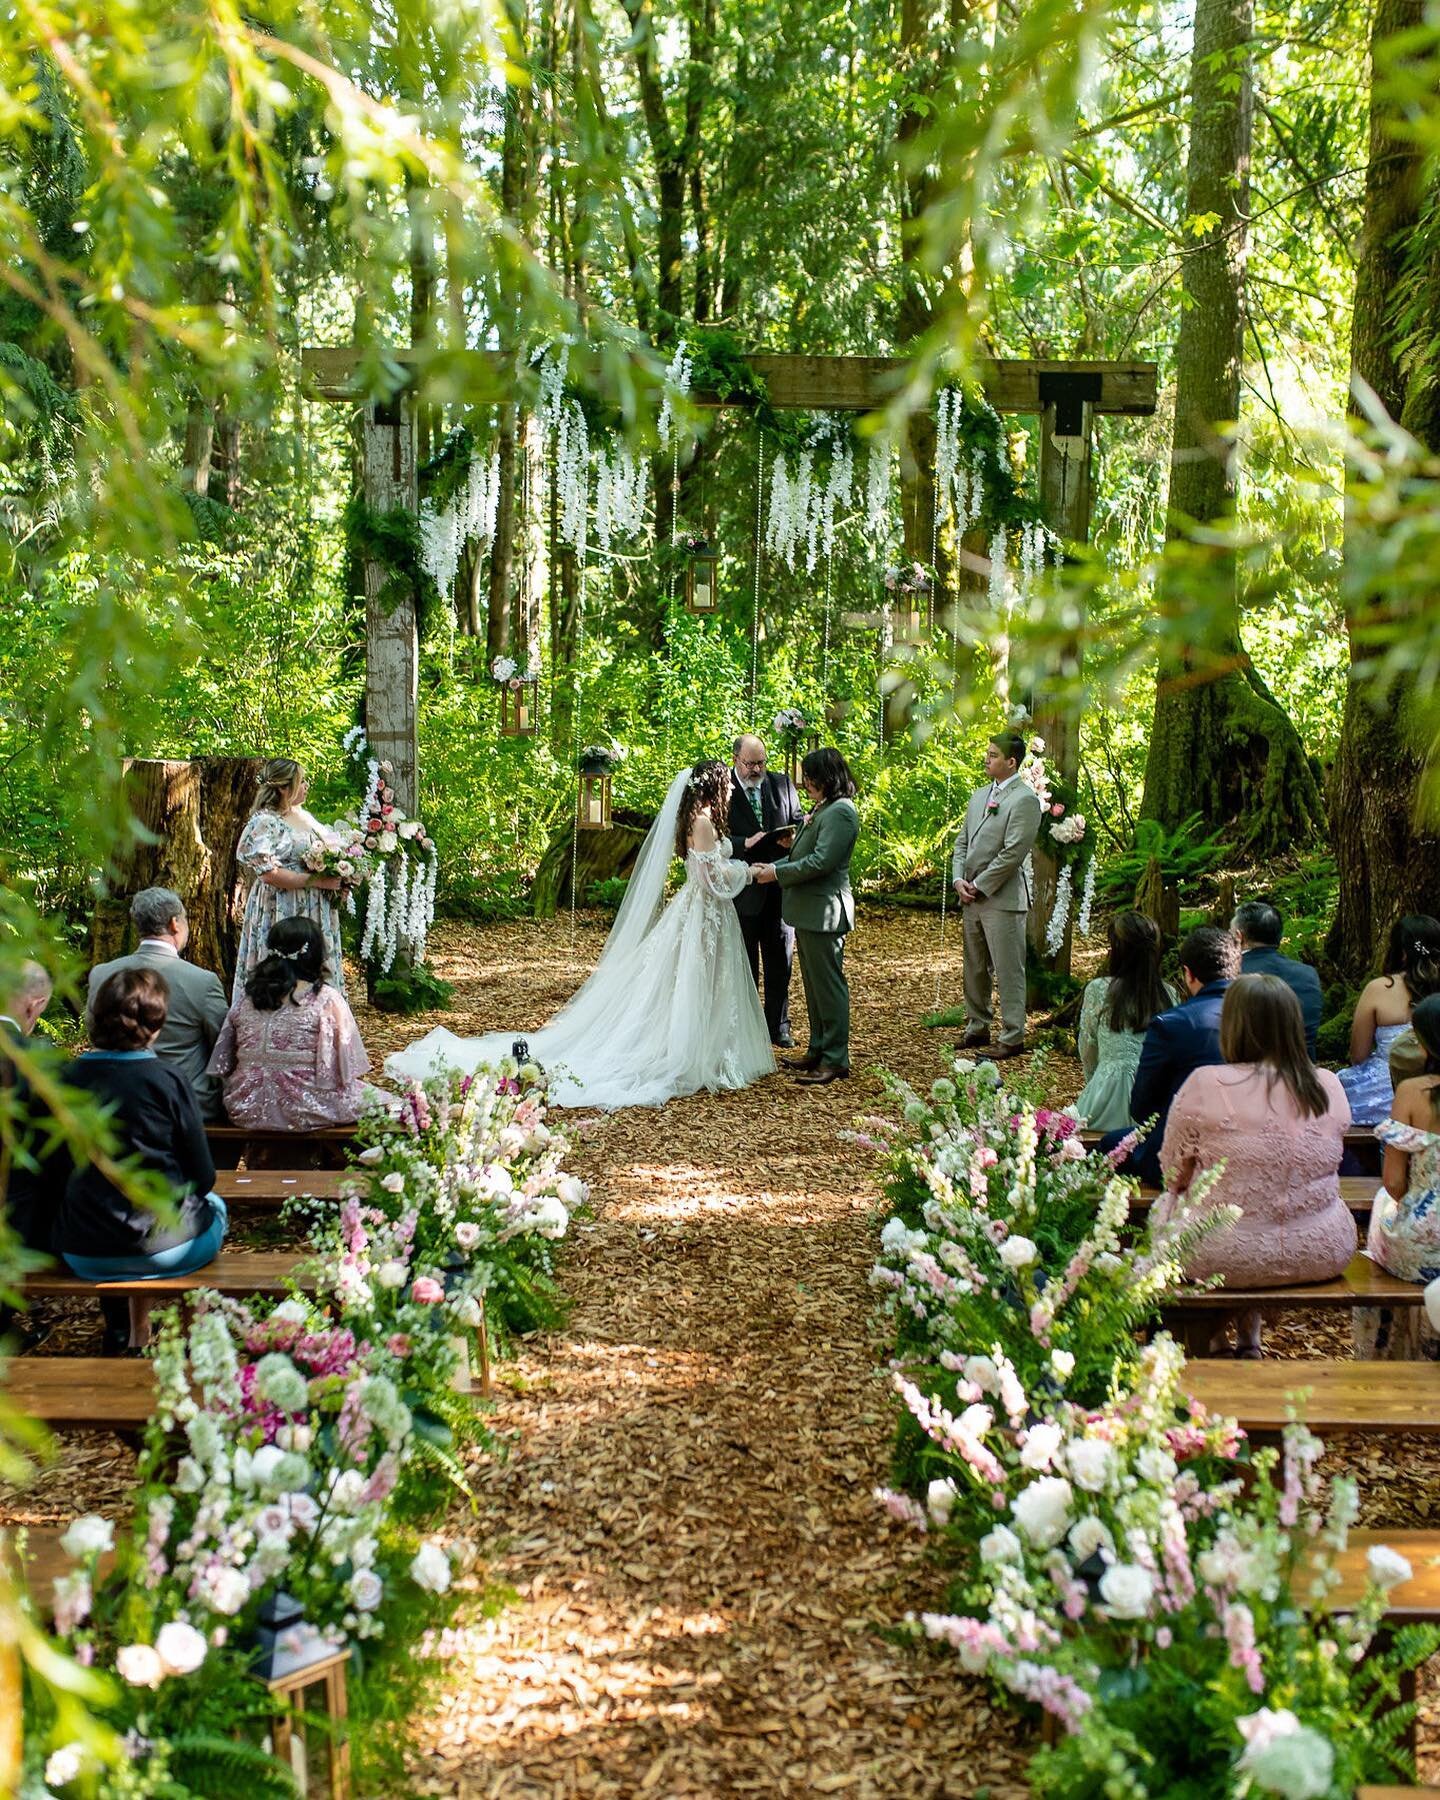 And then there were two. 

Only two dates remain for our 2024 season (5/17 &amp; 5/24). This beautiful wedding featured here was one of our May 2022 weddings, and it was spectacular!

The gardens are blooming, the weather is just starting to get warm